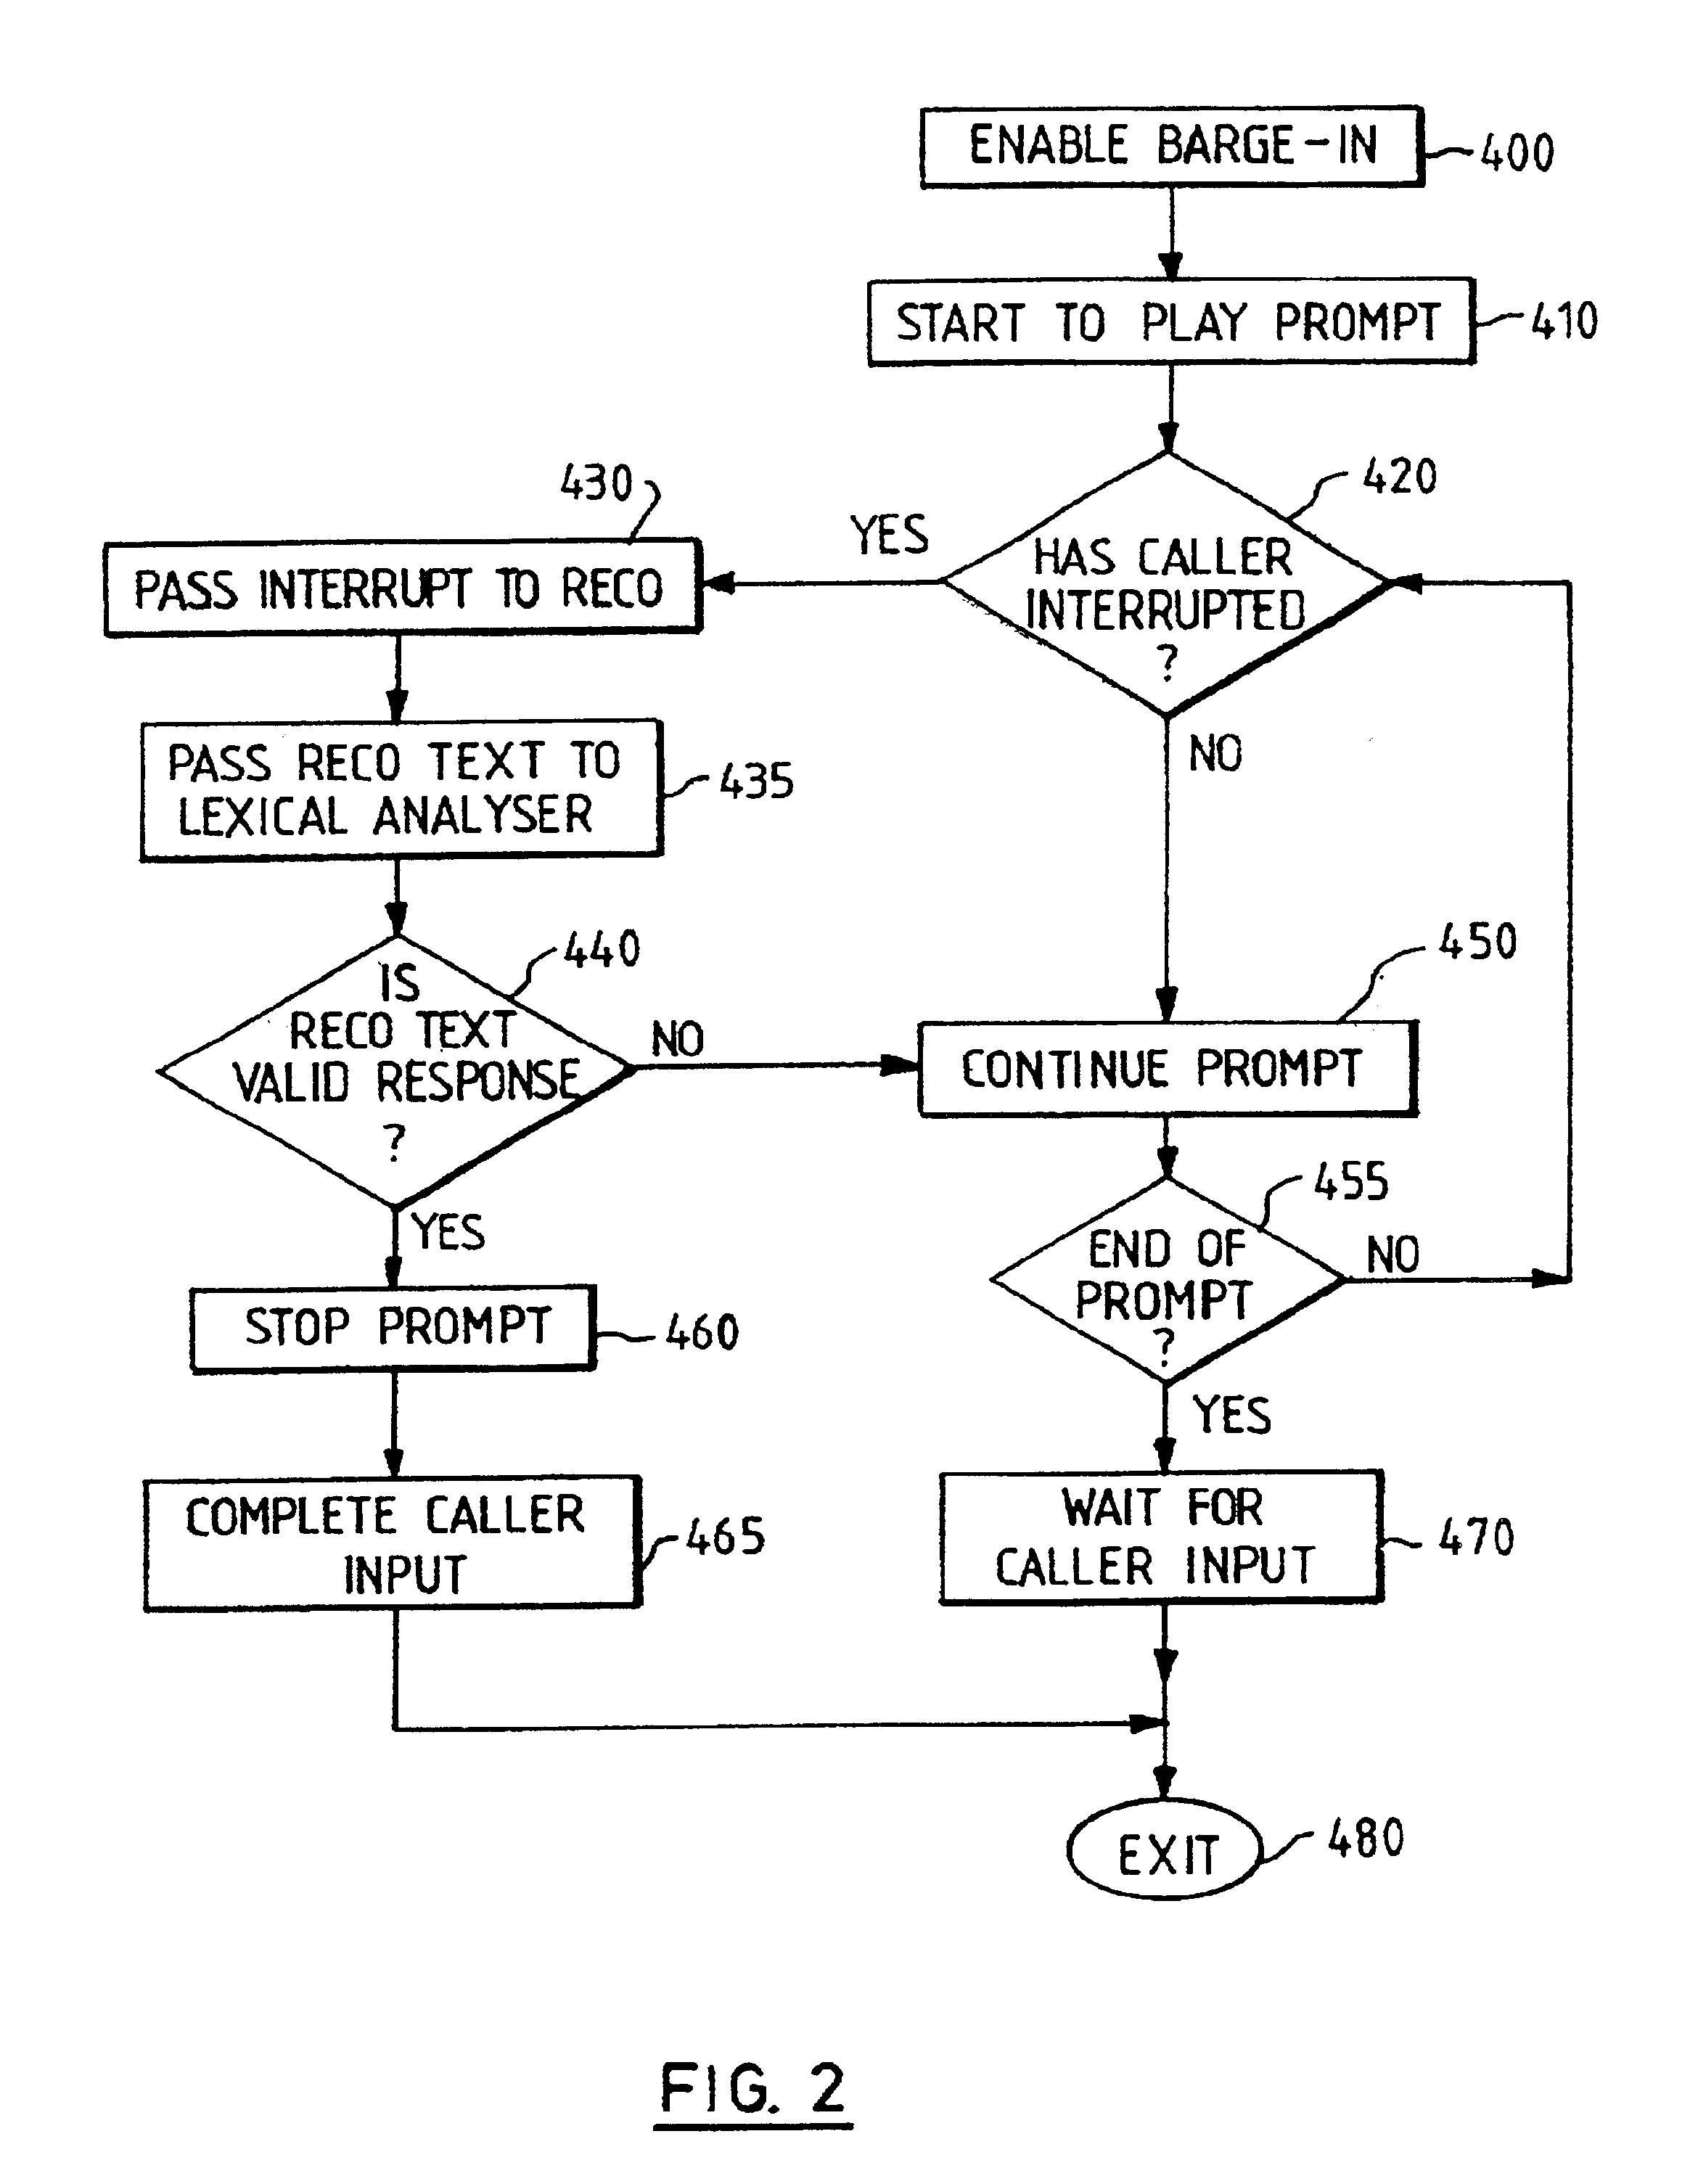 Speech recognition system with barge-in capability